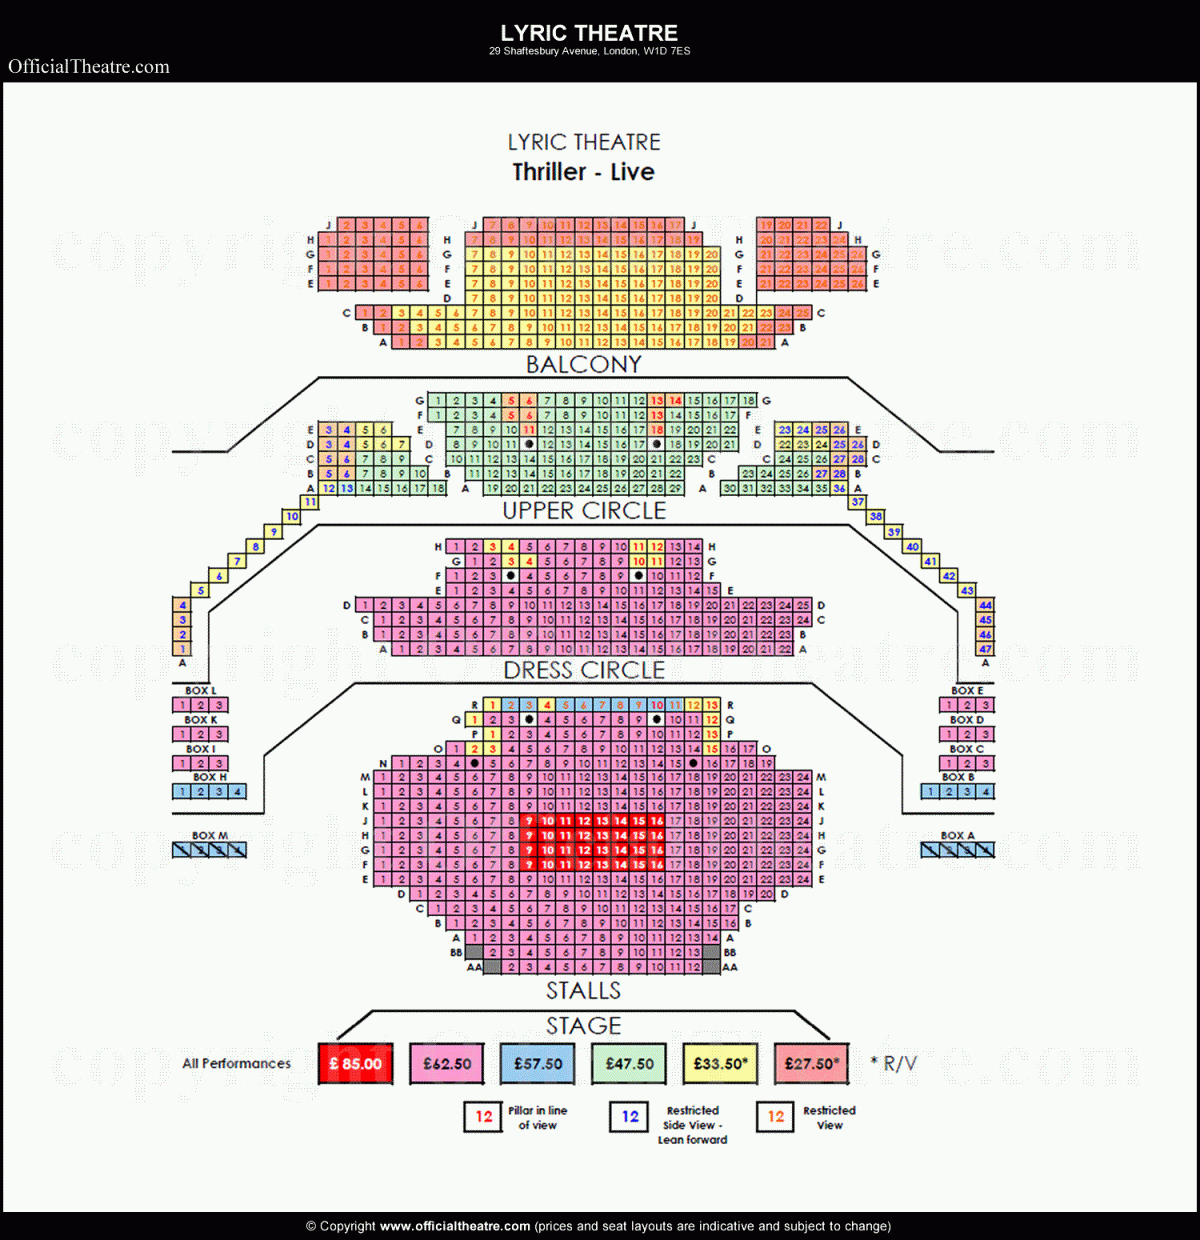 Lyric Theatre London Seat Map And Prices For Thriller Live von Lyric Opera Seating Chart Photo